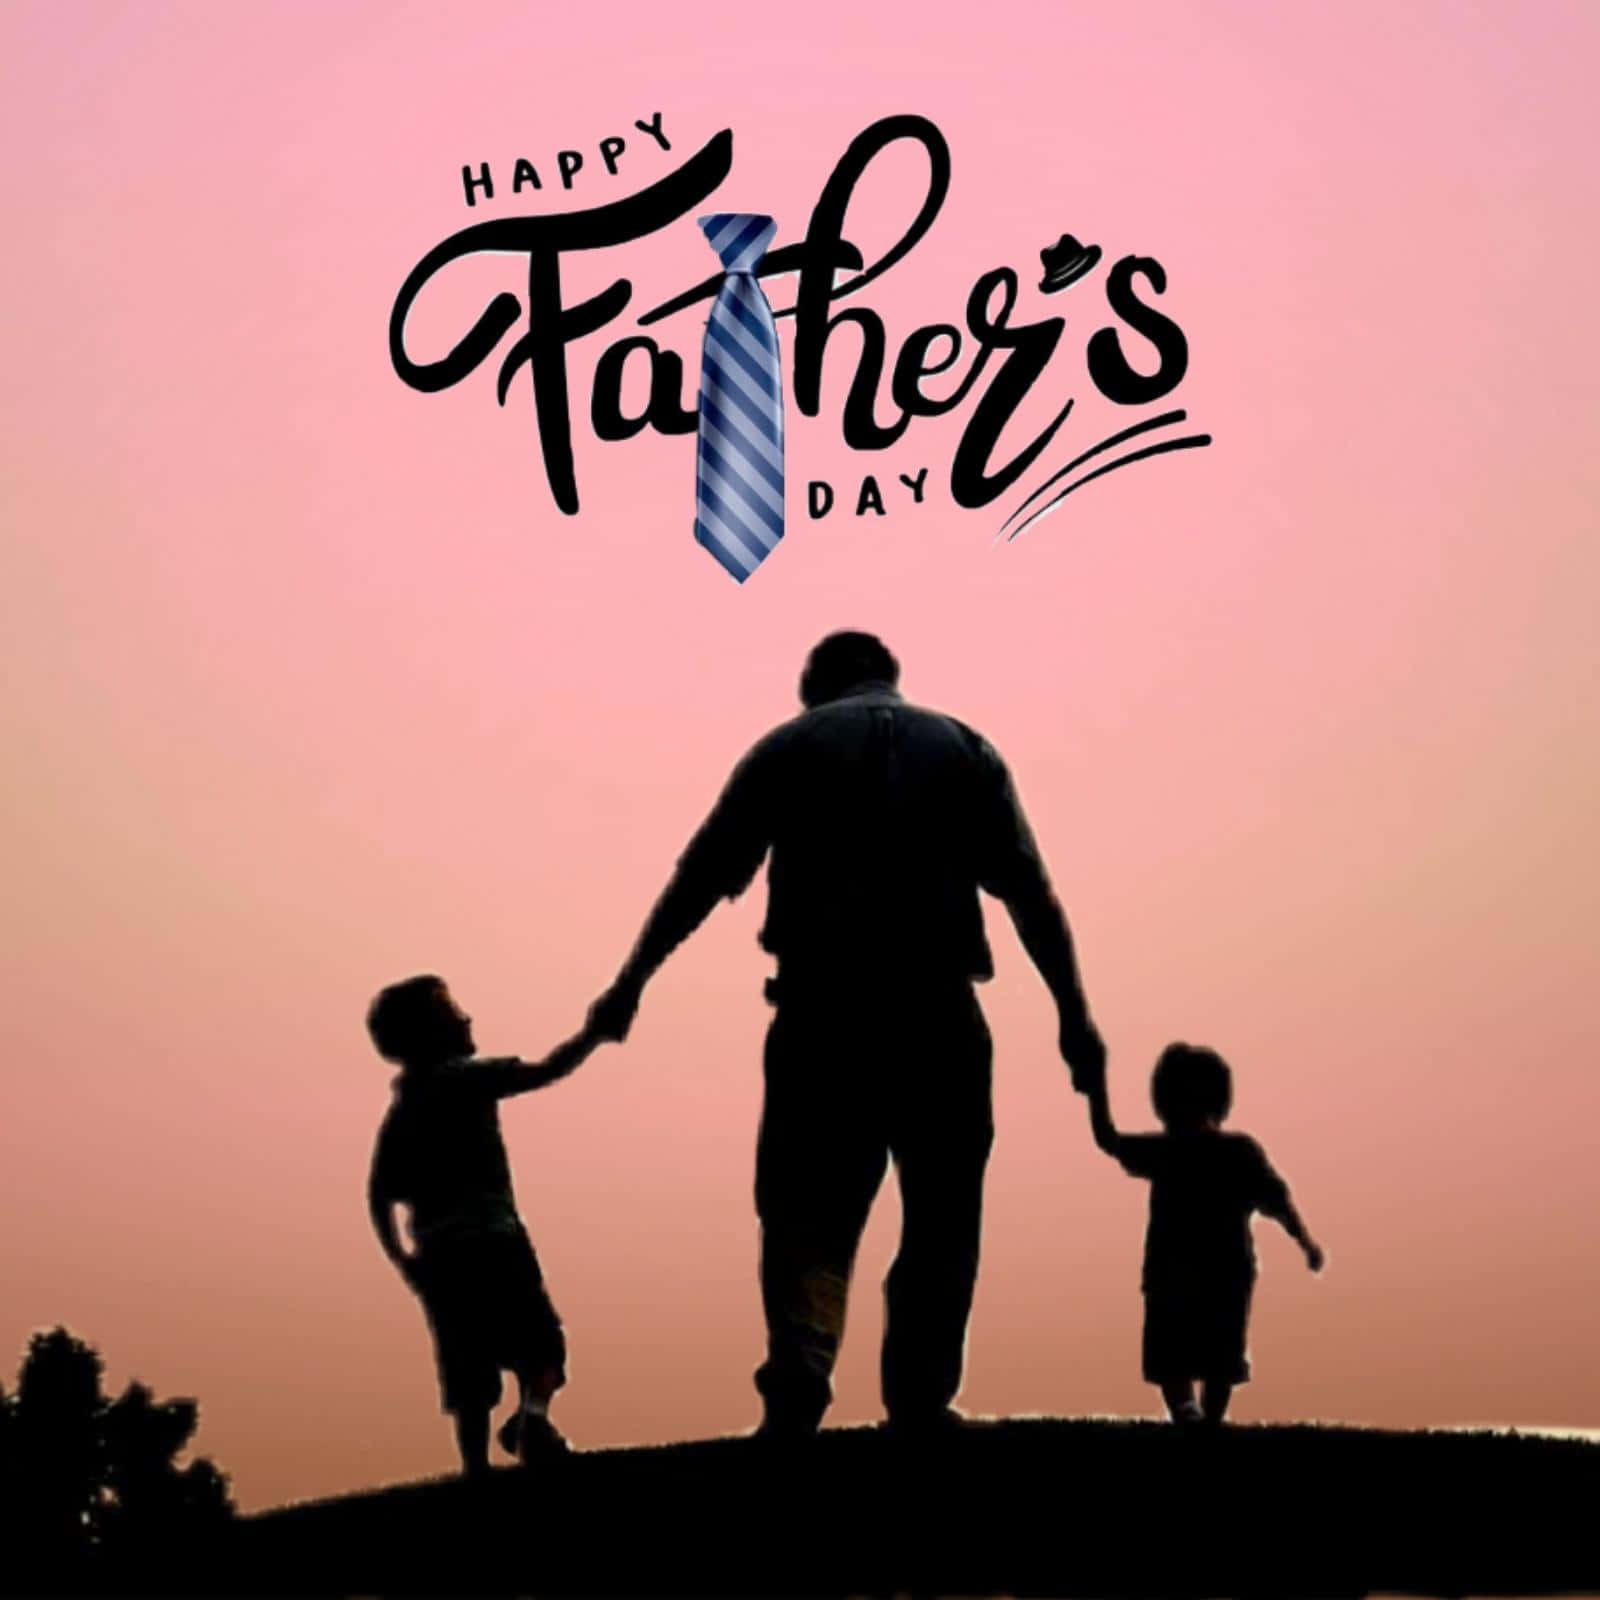 Celebrating all the amazing dads out there this Father's Day!